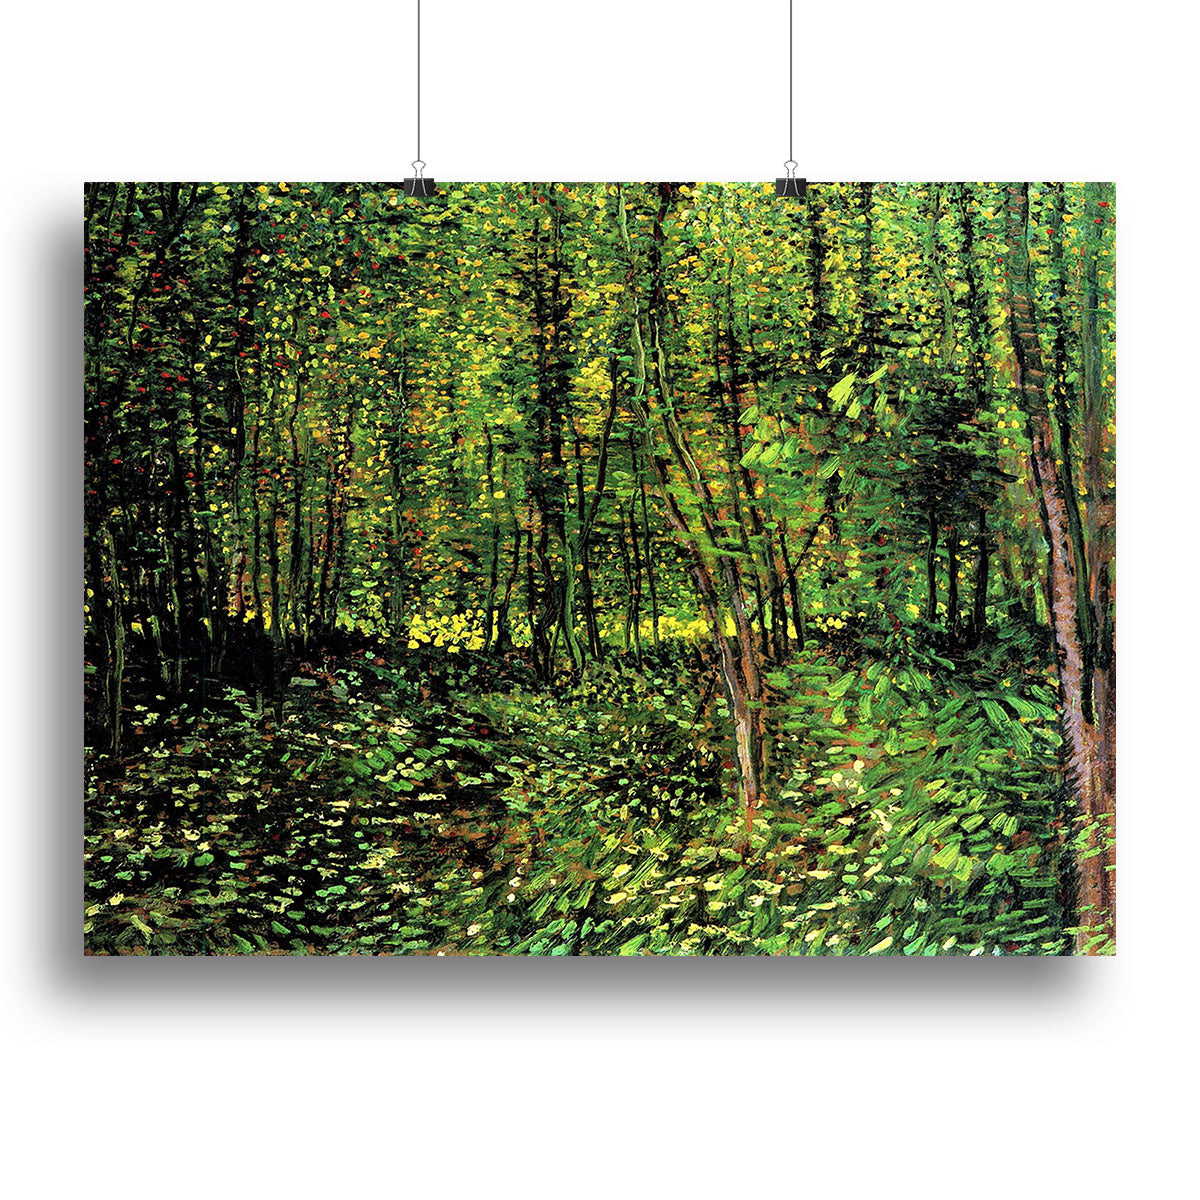 Trees and Undergrowth 2 by Van Gogh Canvas Print or Poster - Canvas Art Rocks - 2